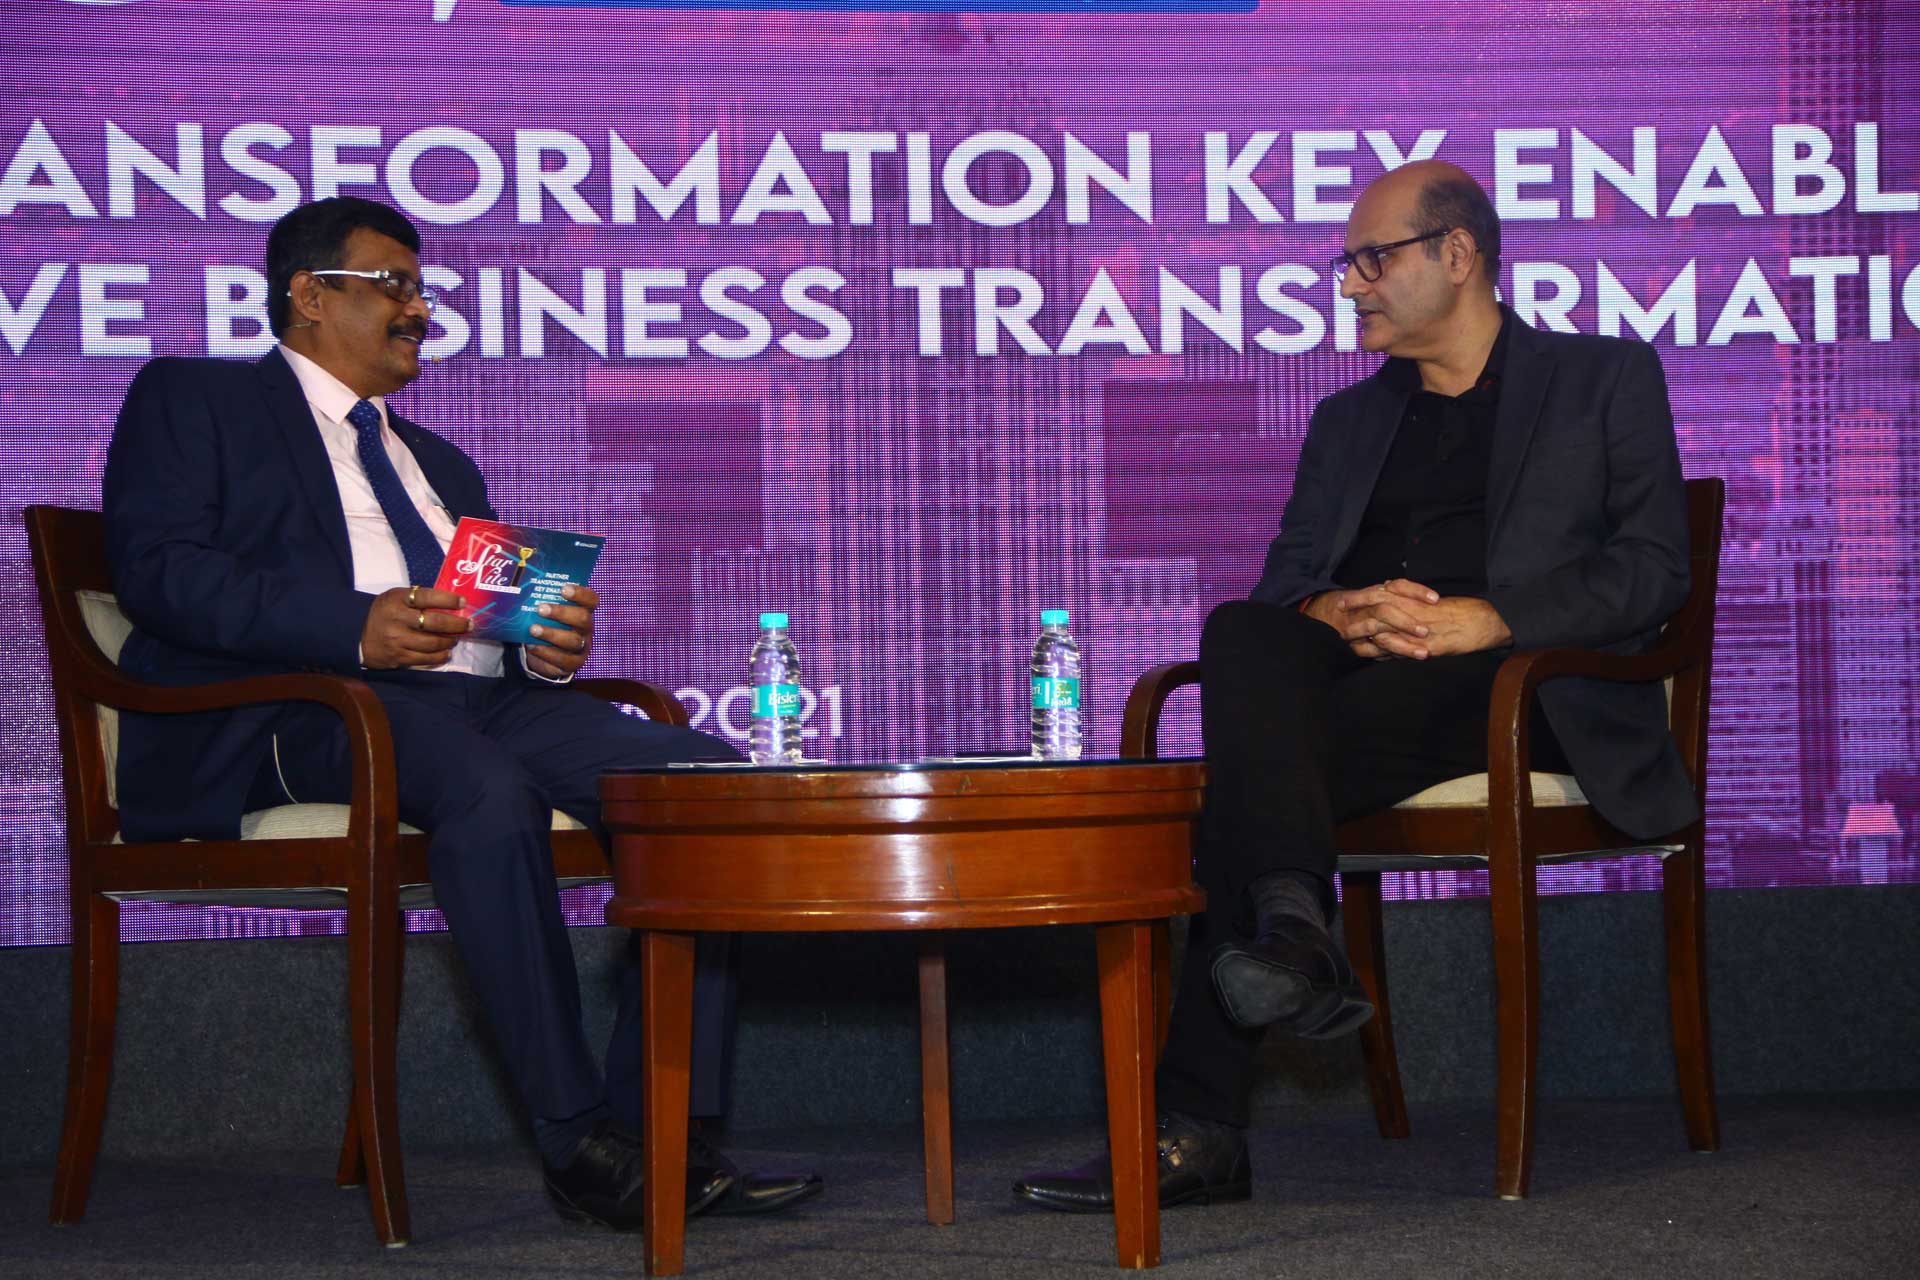 Dr. Deepak Kumar Sahu, Chief- Editor, VARINDIA with Mr. Anil Sethi, Vice President & General Manager- Channels India, Dell Technologies in the Fire-si